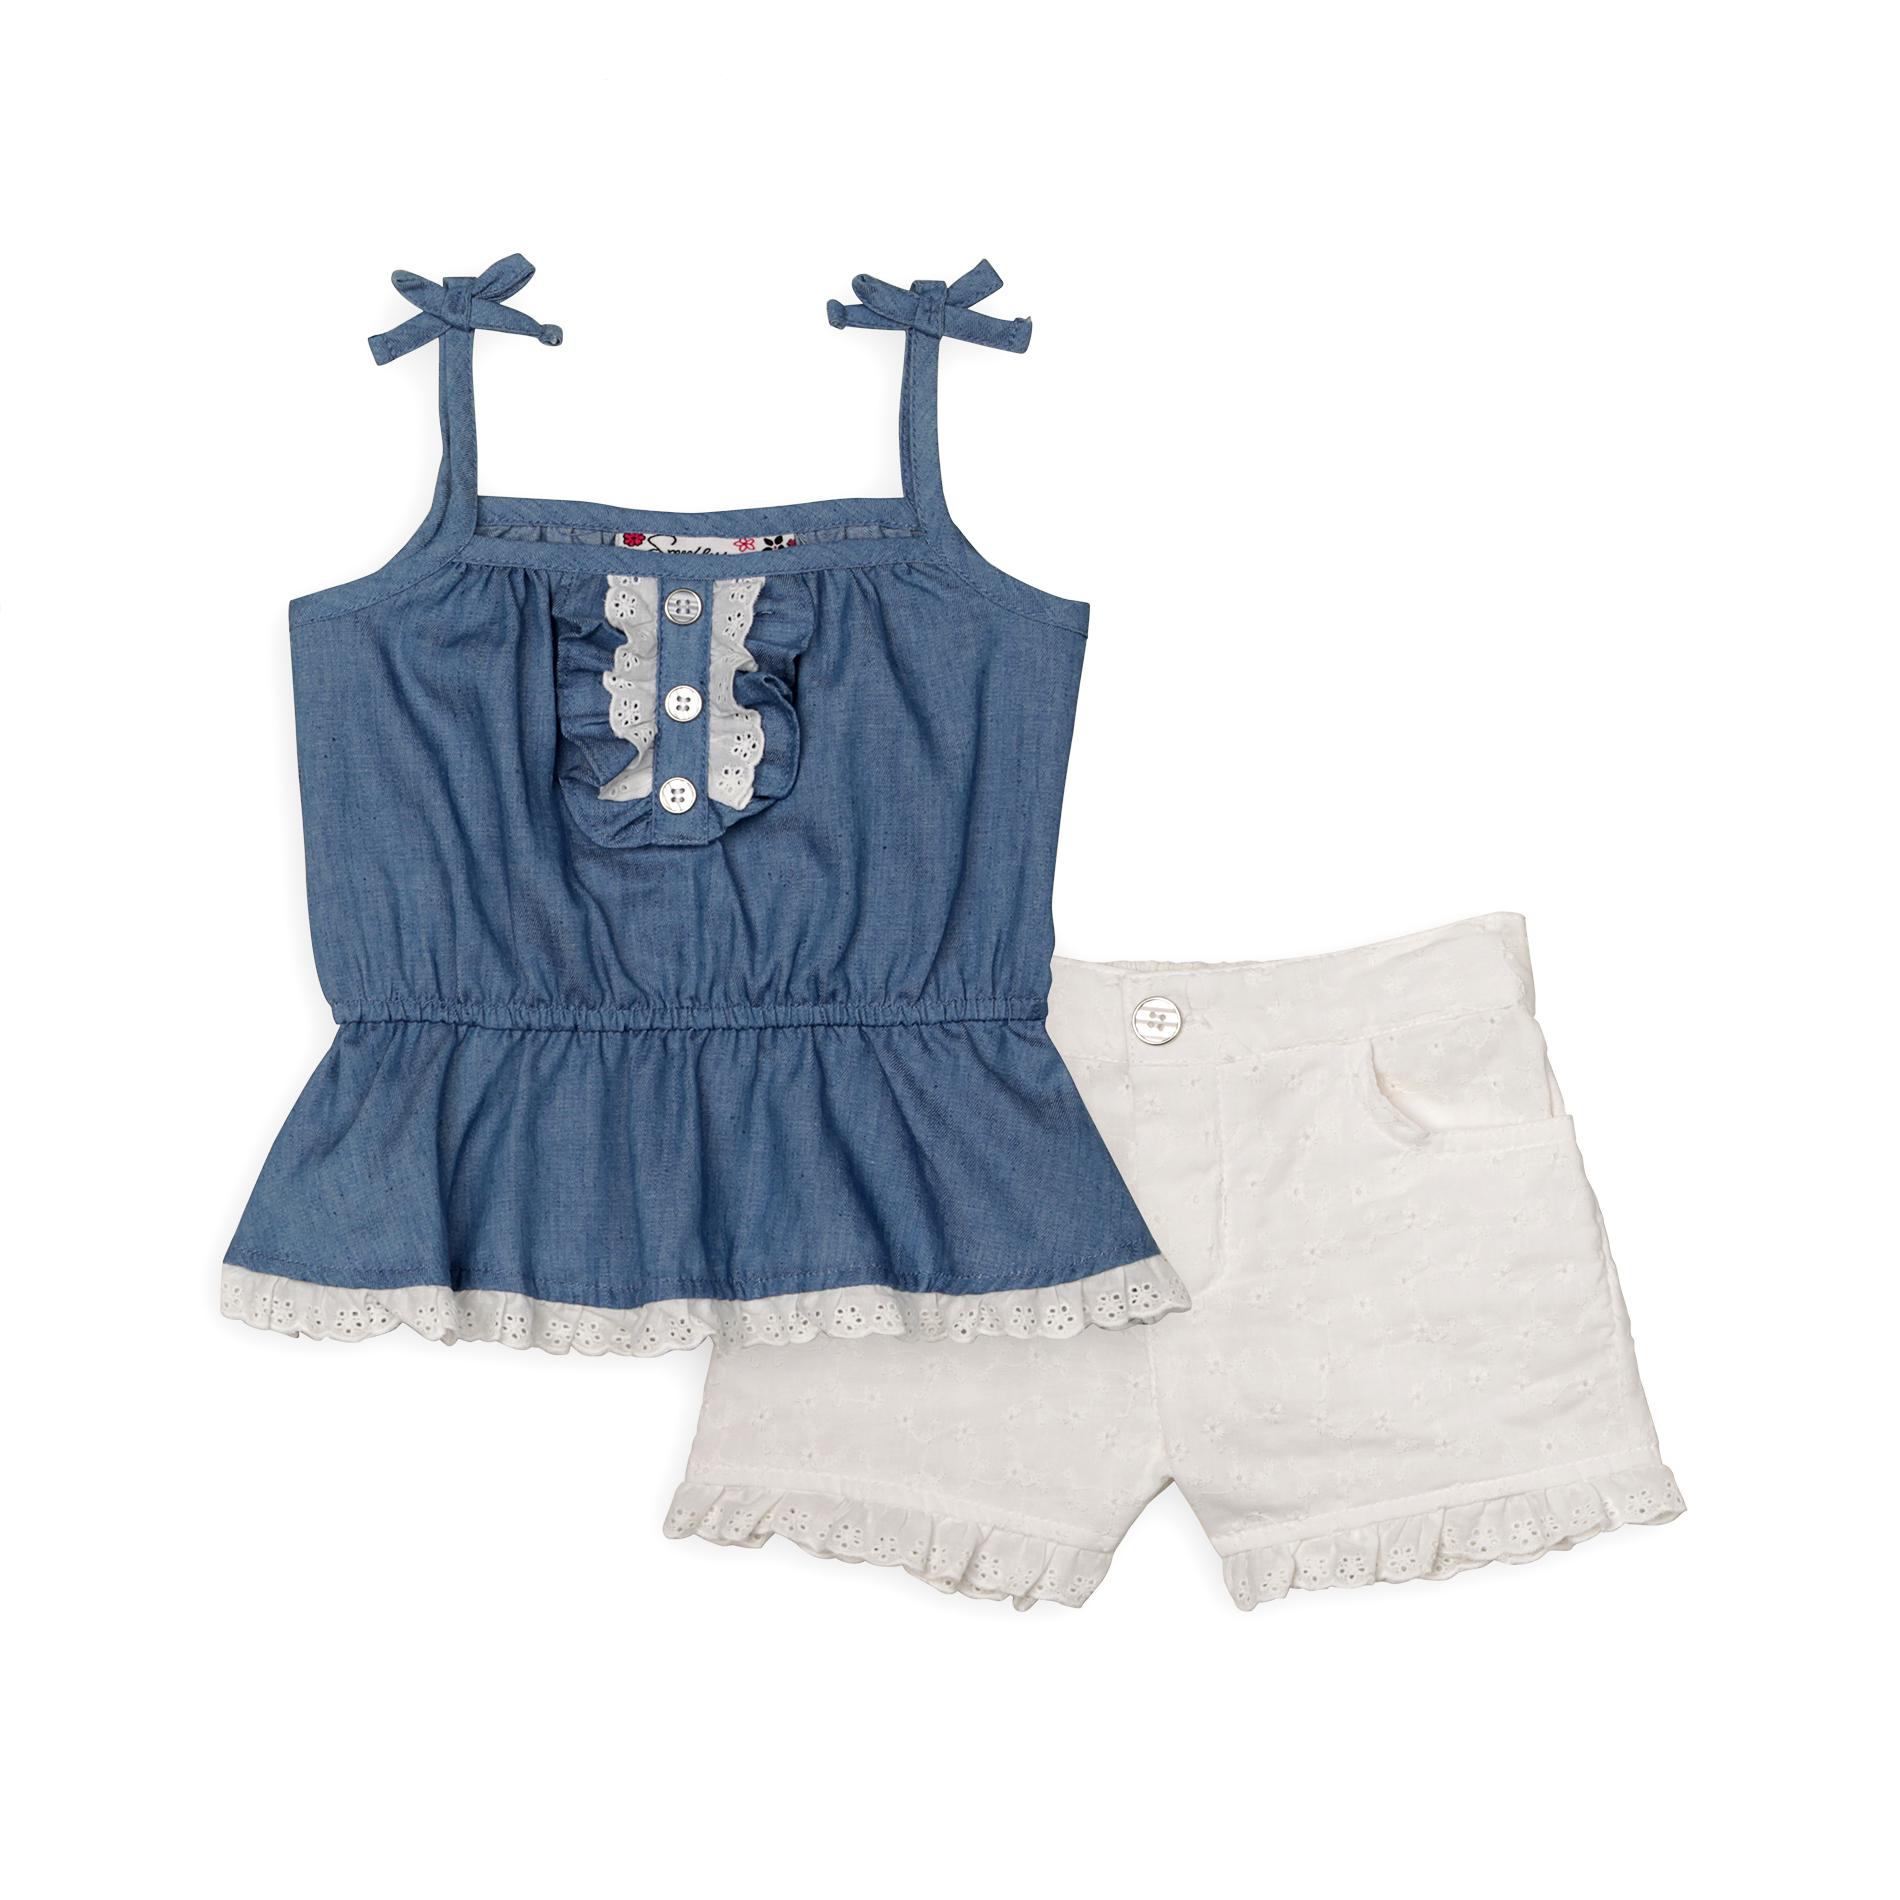 Speechless Toddler Girl's Chambray Top & Shorts